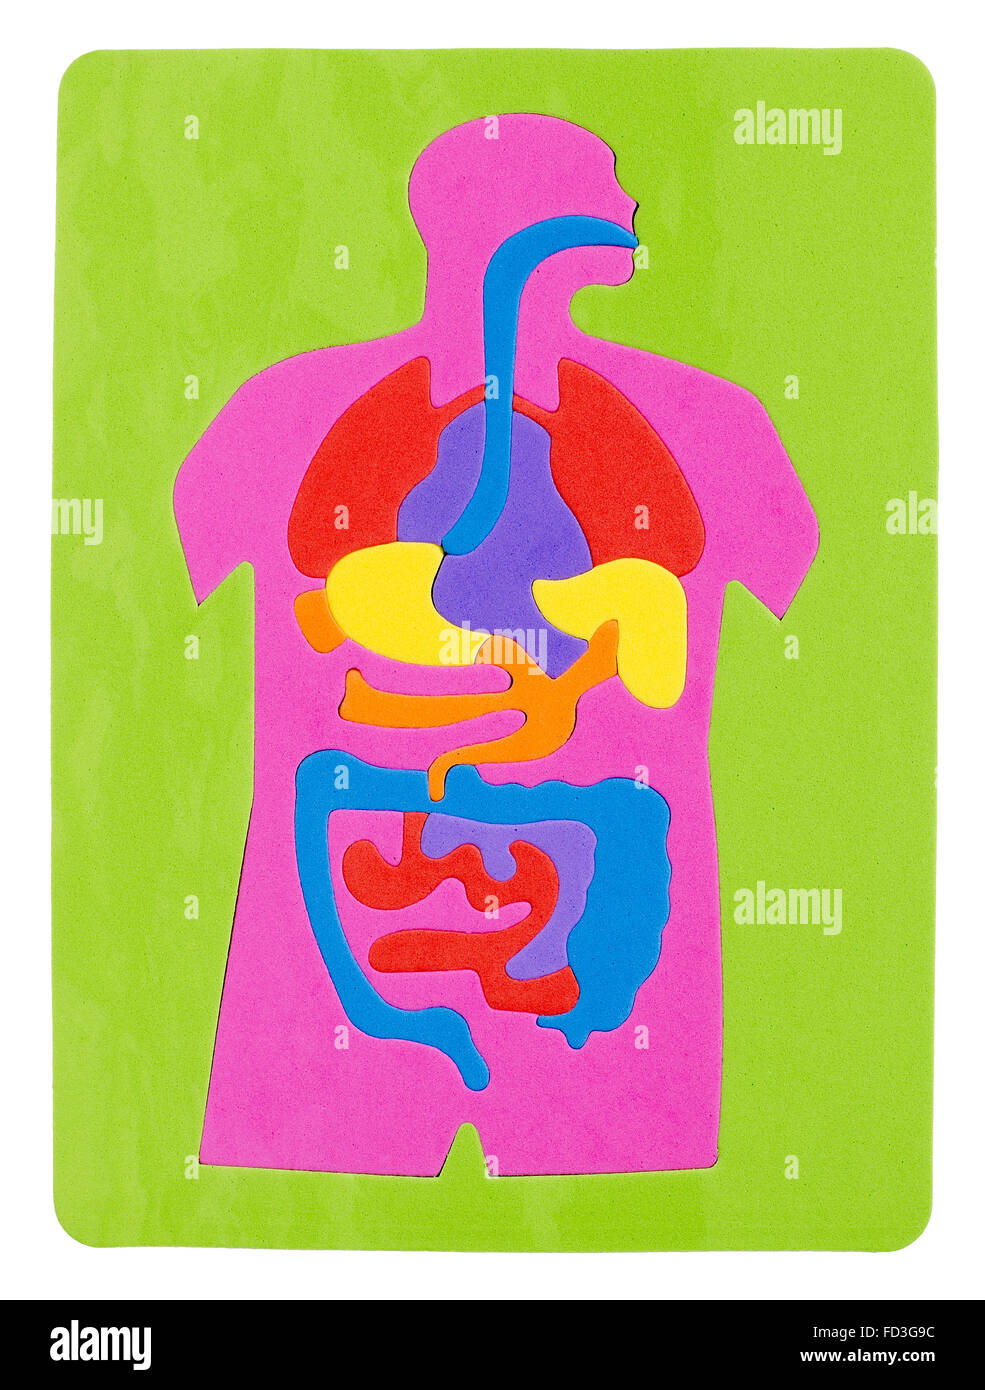 Digestive System Puzzle Stock Photo